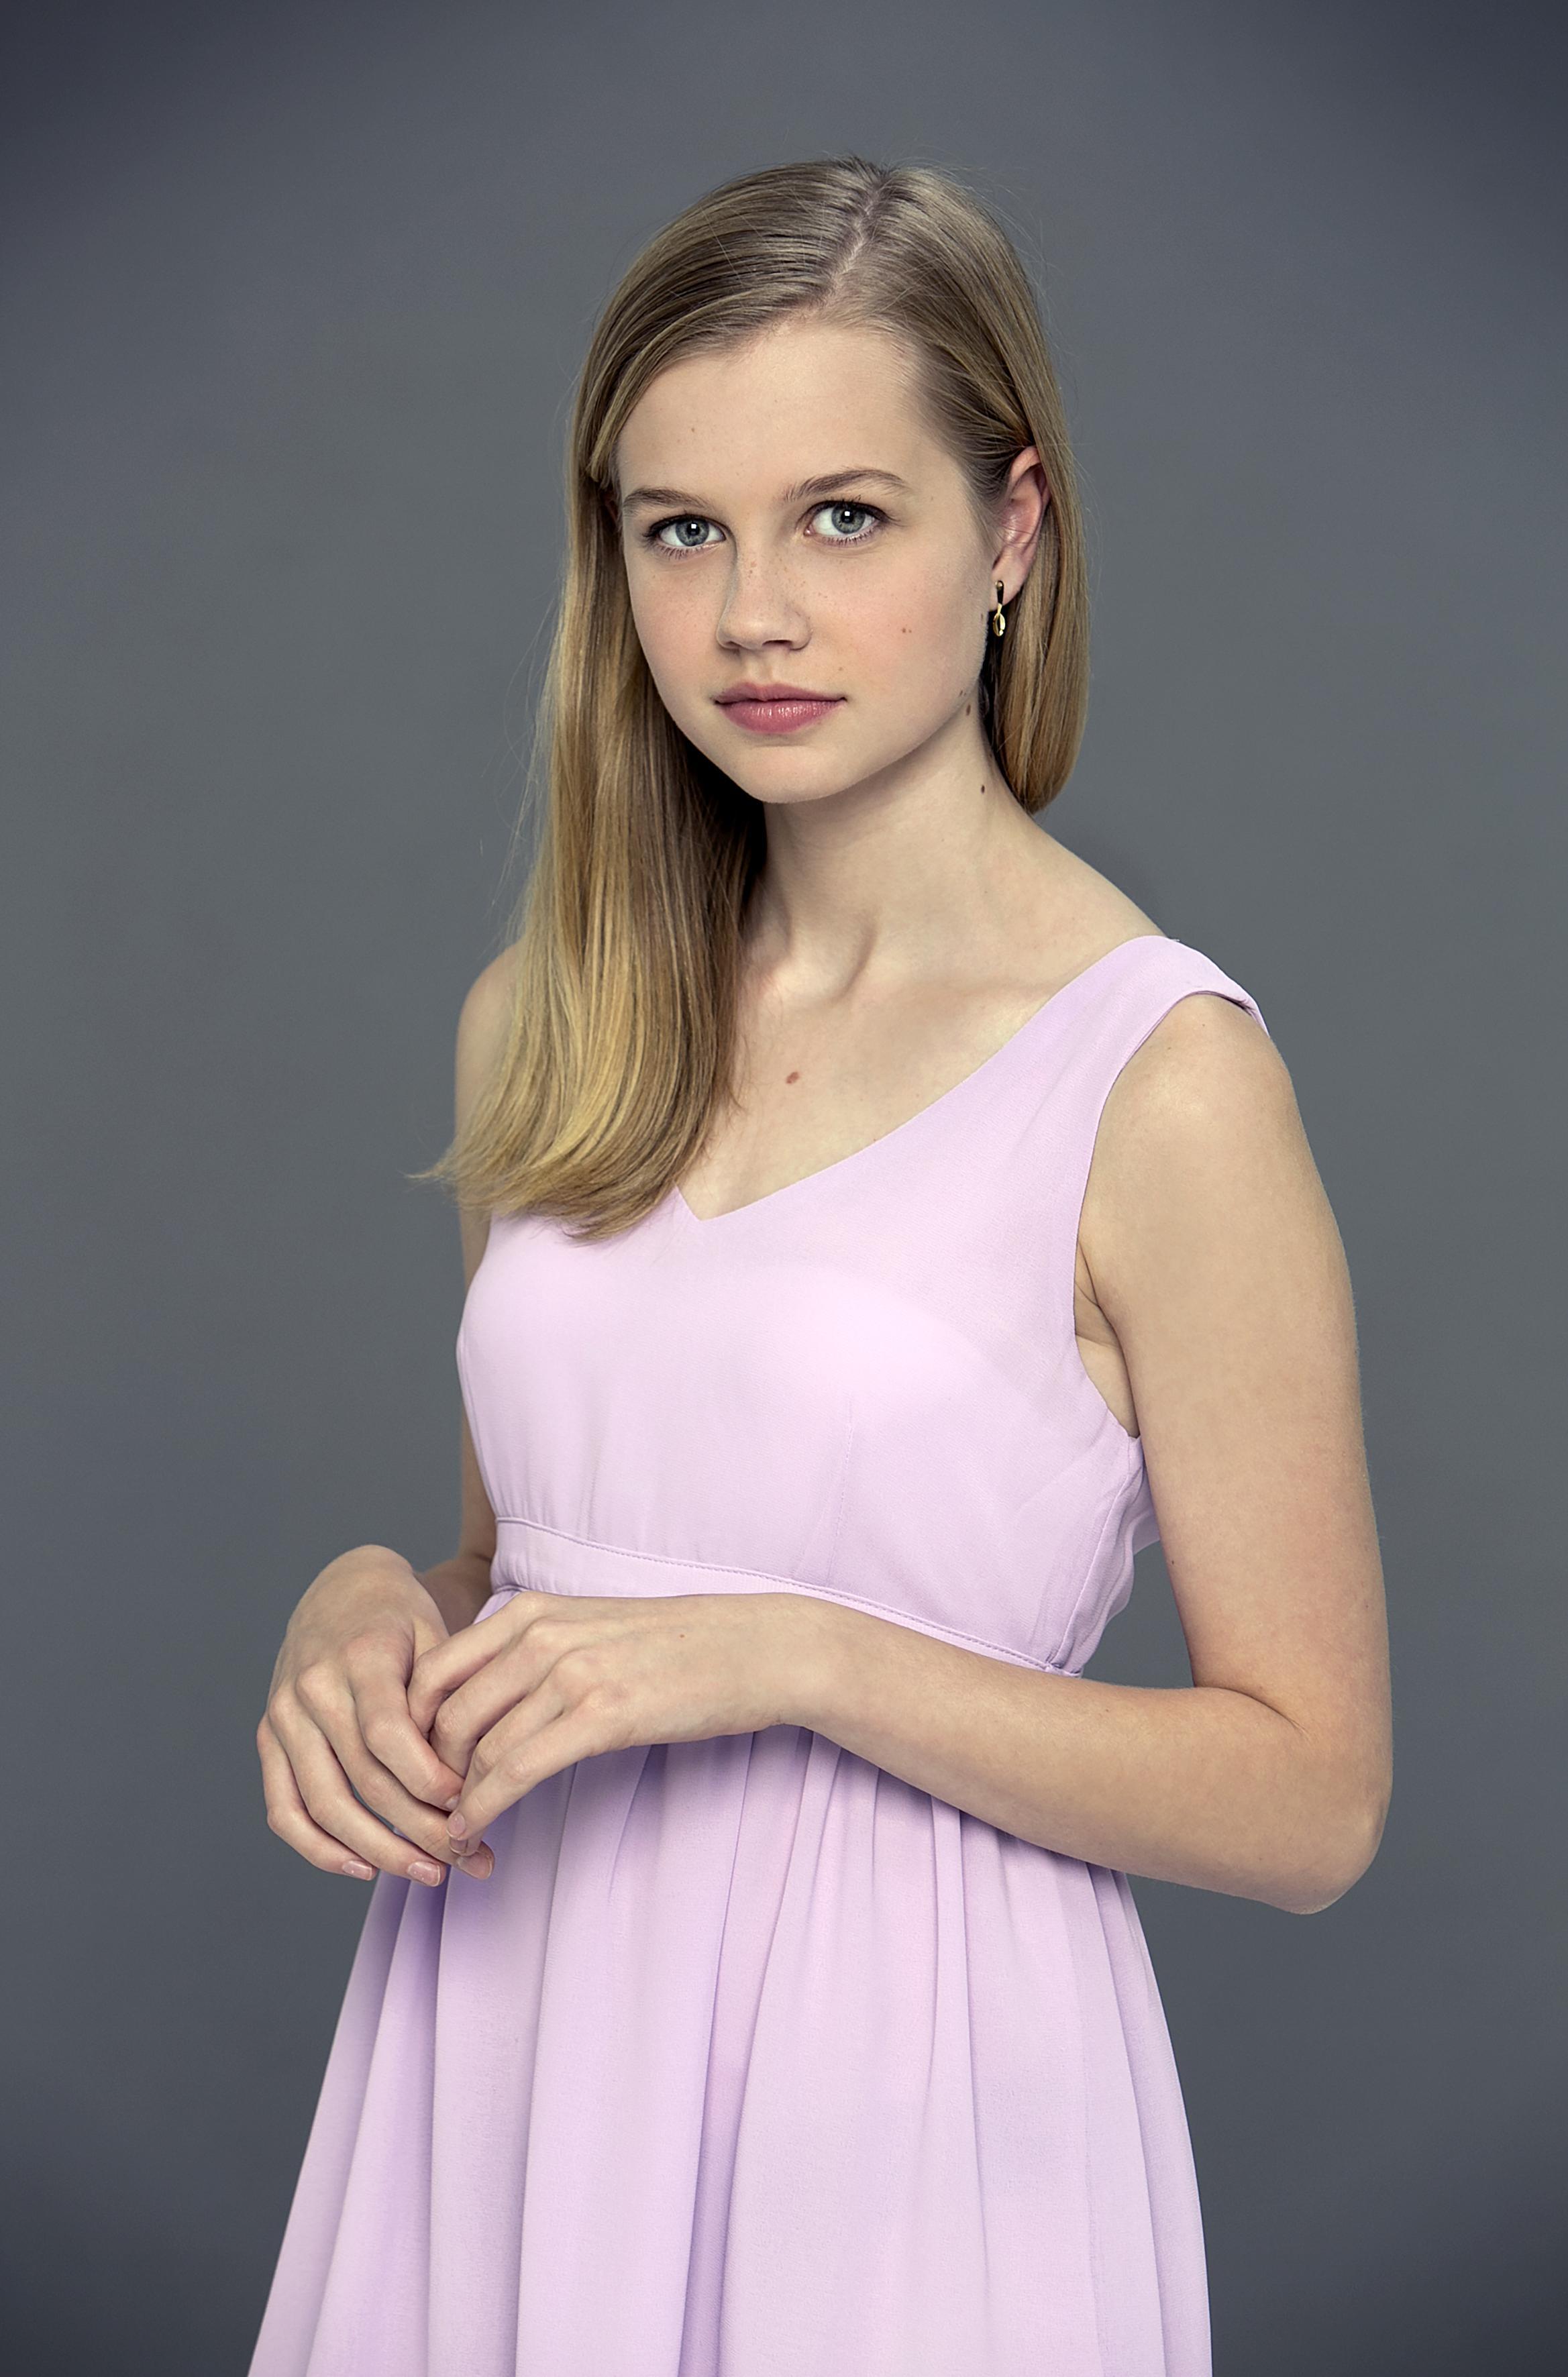 Angourie Rice Bio, Height, Age, Weight, Boyfriend and Facts